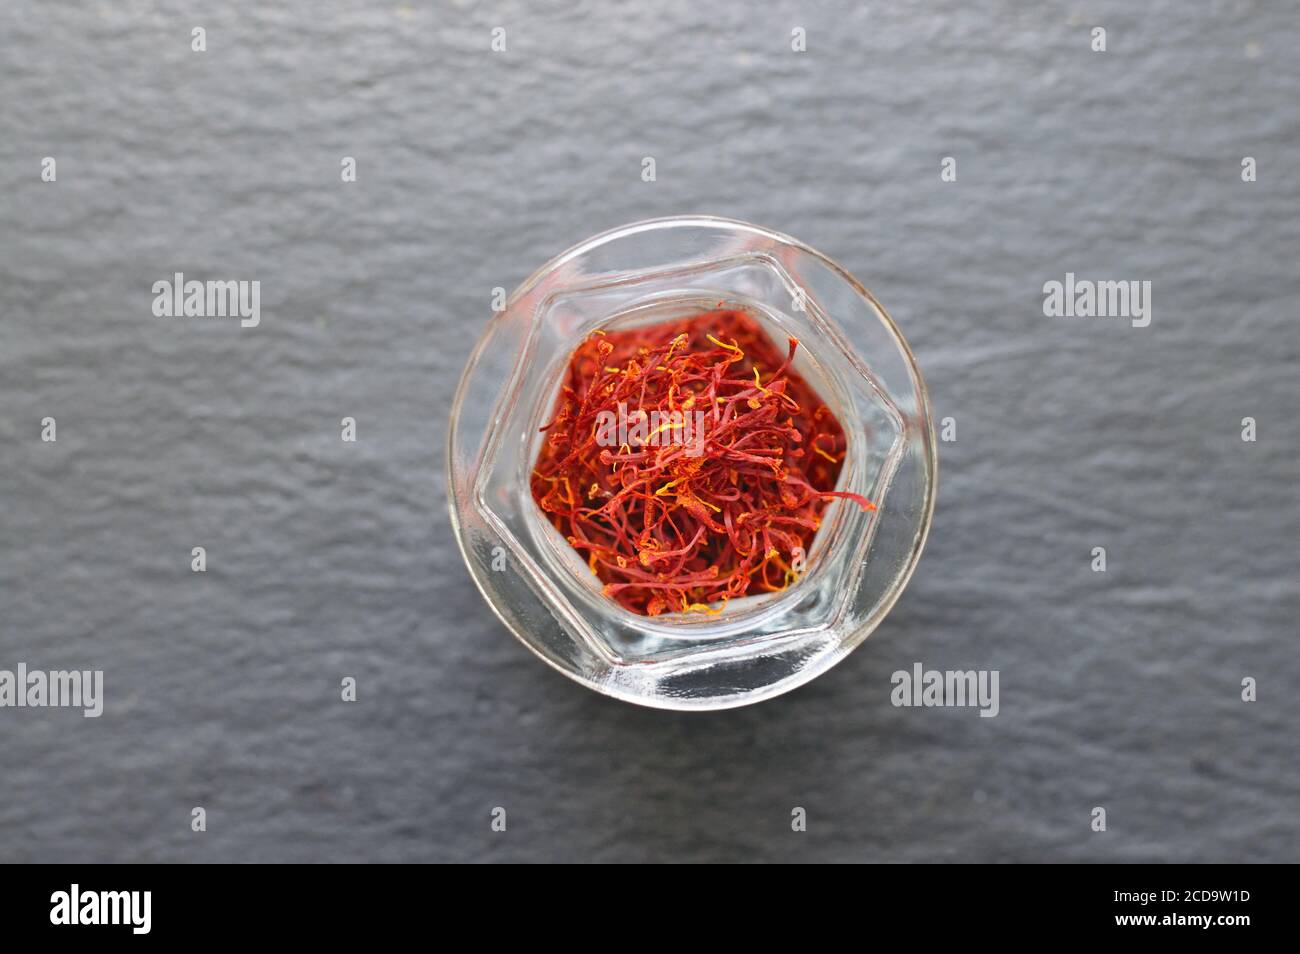 High angle view of saffron threads in a jar Stock Photo